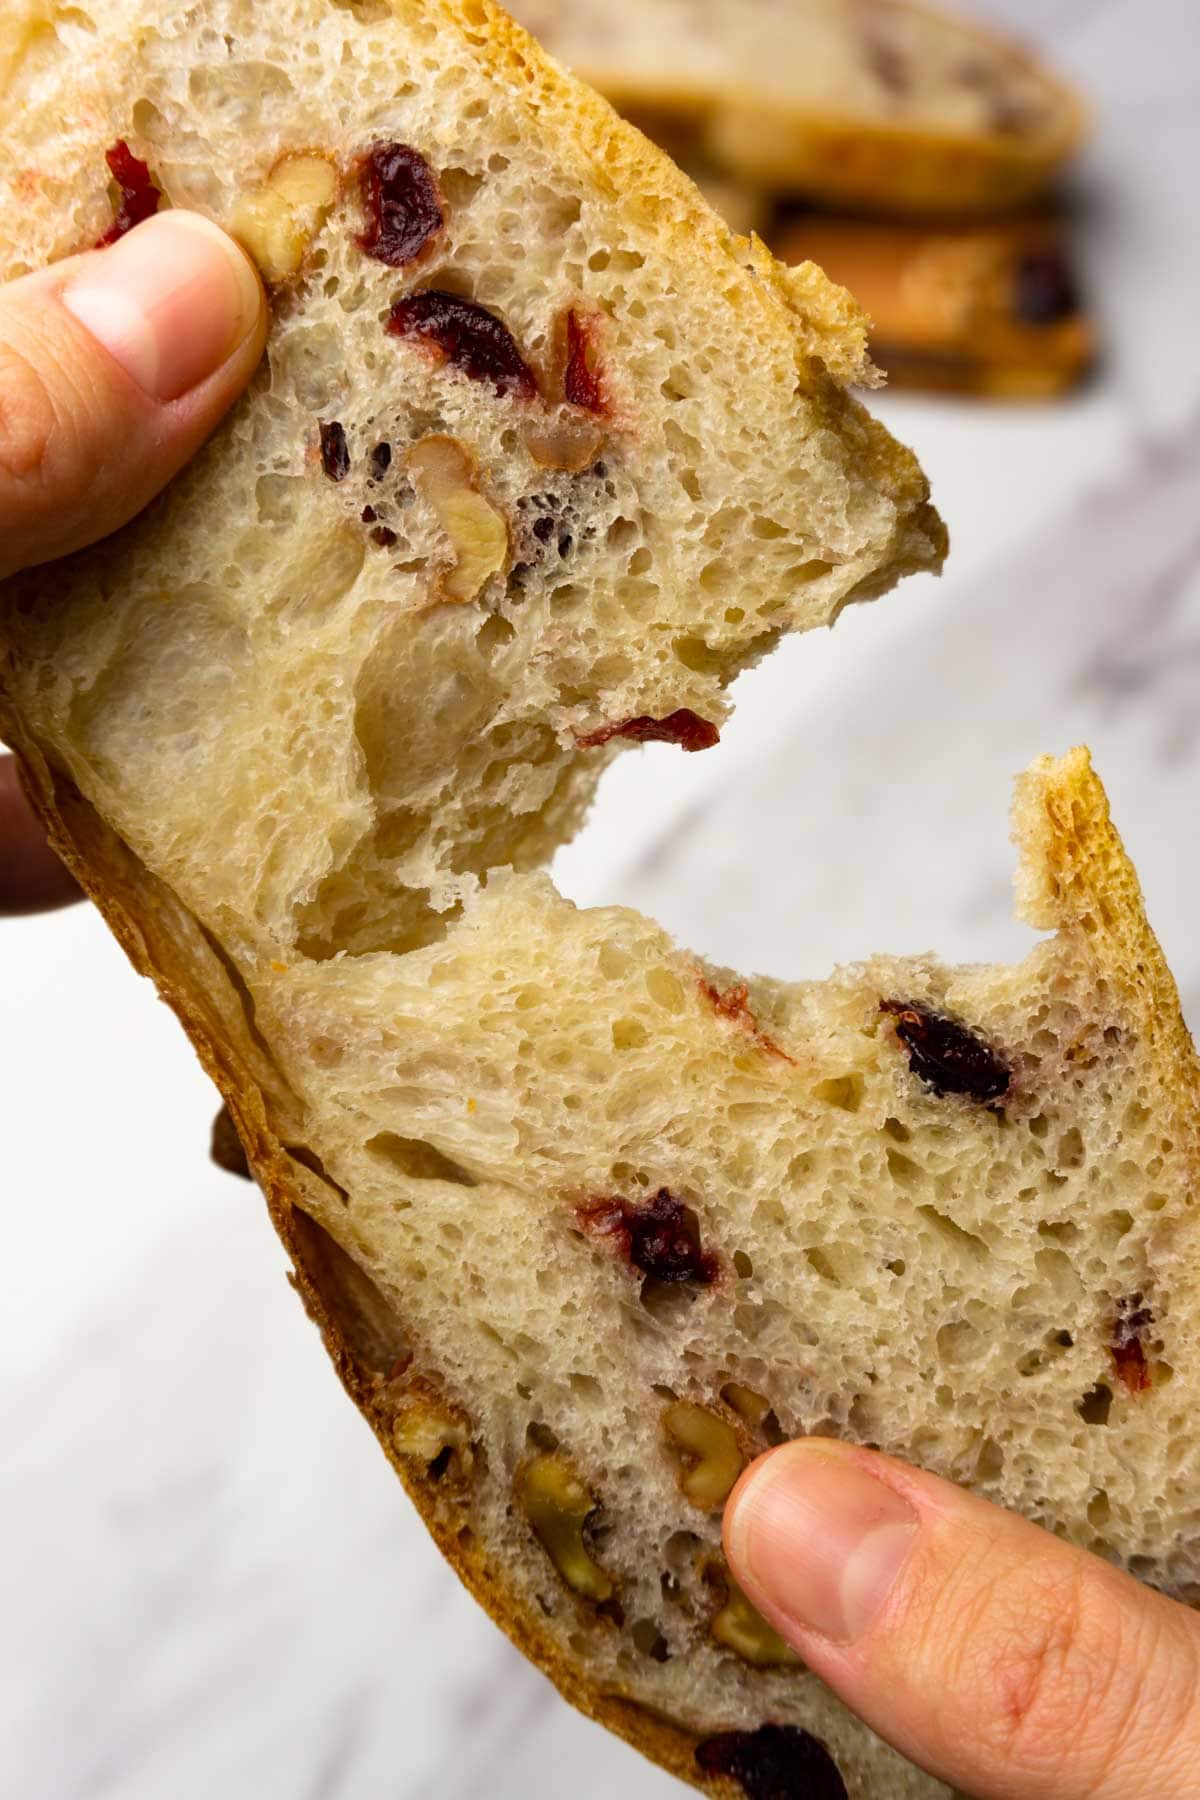 Hands are ripping apart a piece of bread with cranberries and walnuts.